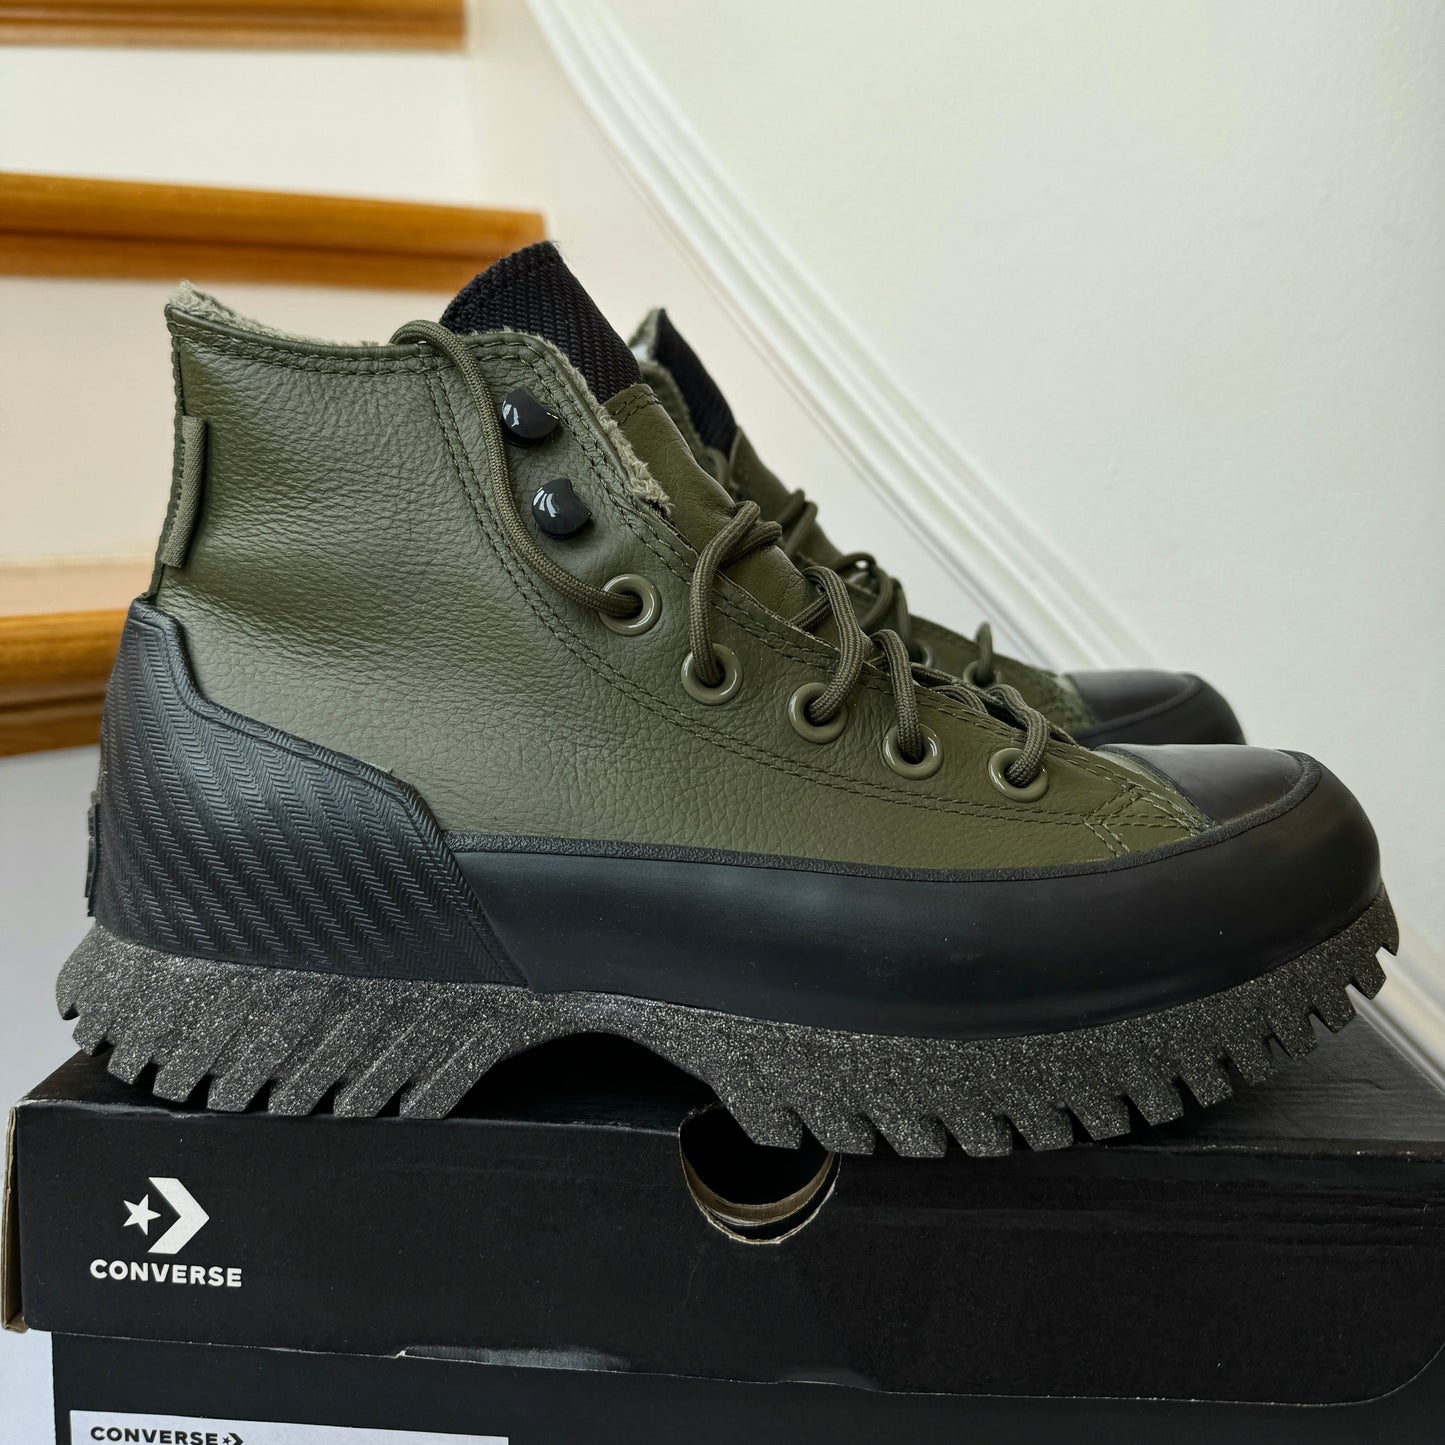 Converse Counter Climate Lugged Waterproof Platform Sneakers Green / Black